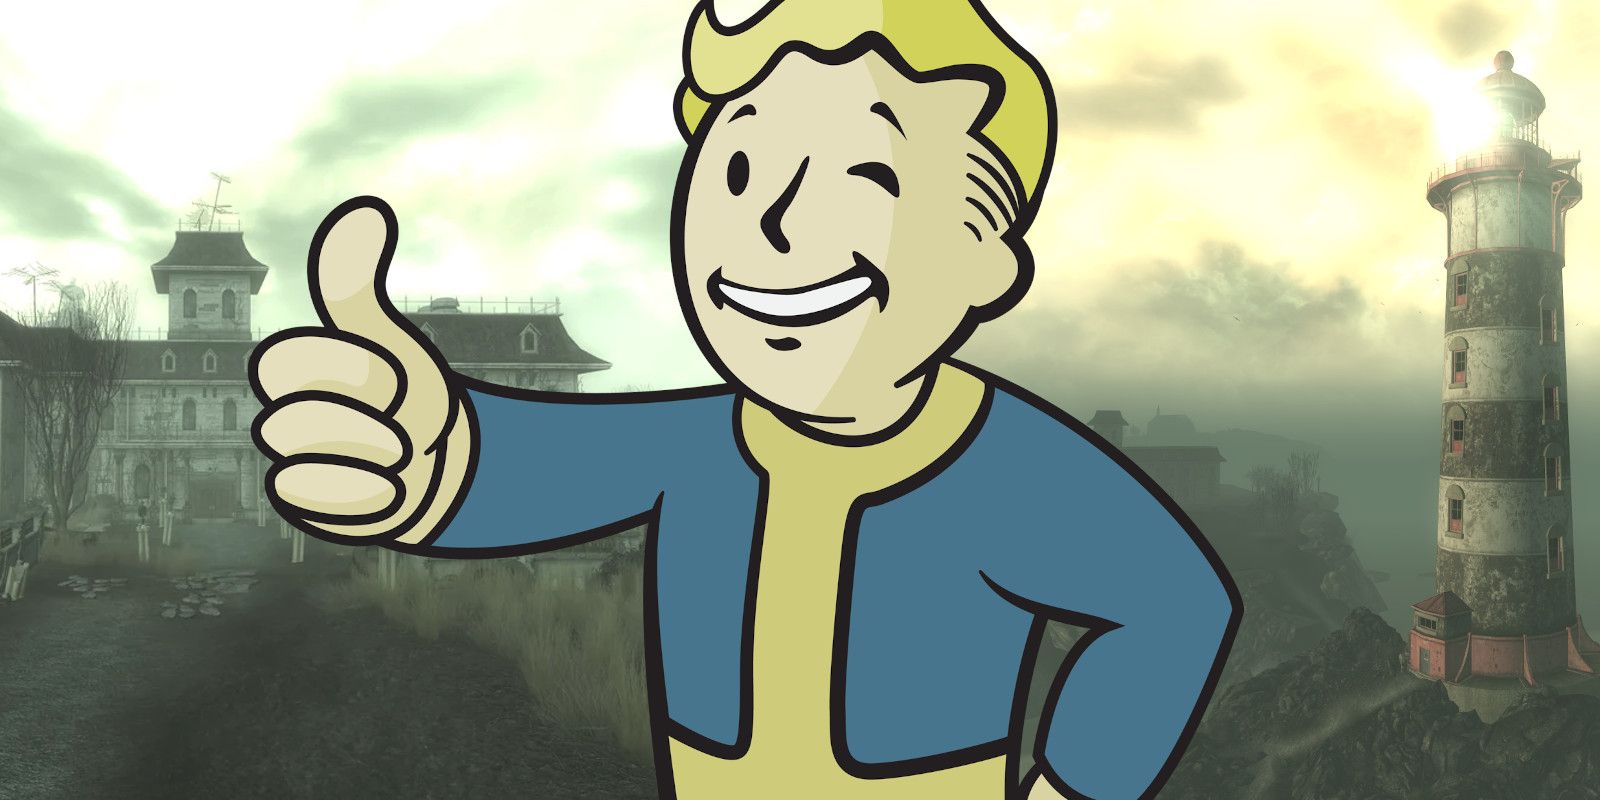 Vault Boy in front of locations from Fallout 3: Point Lookout